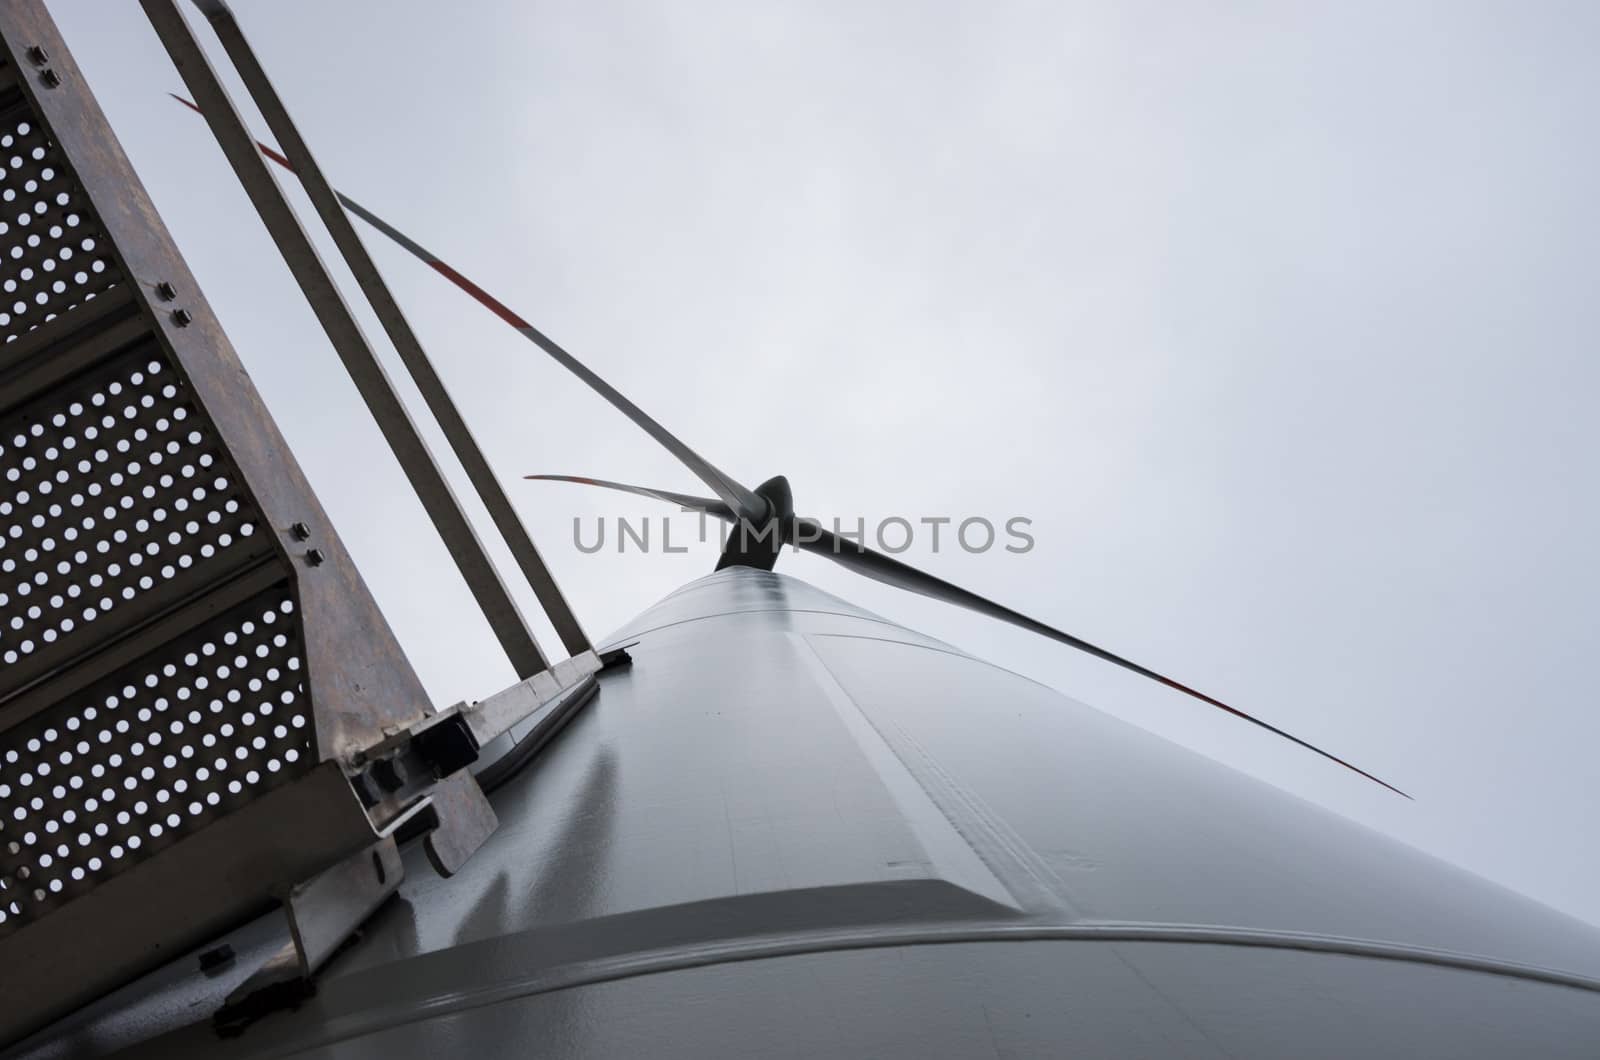 Detail of a wind turbine located on the hills near Riparbella in Tuscany